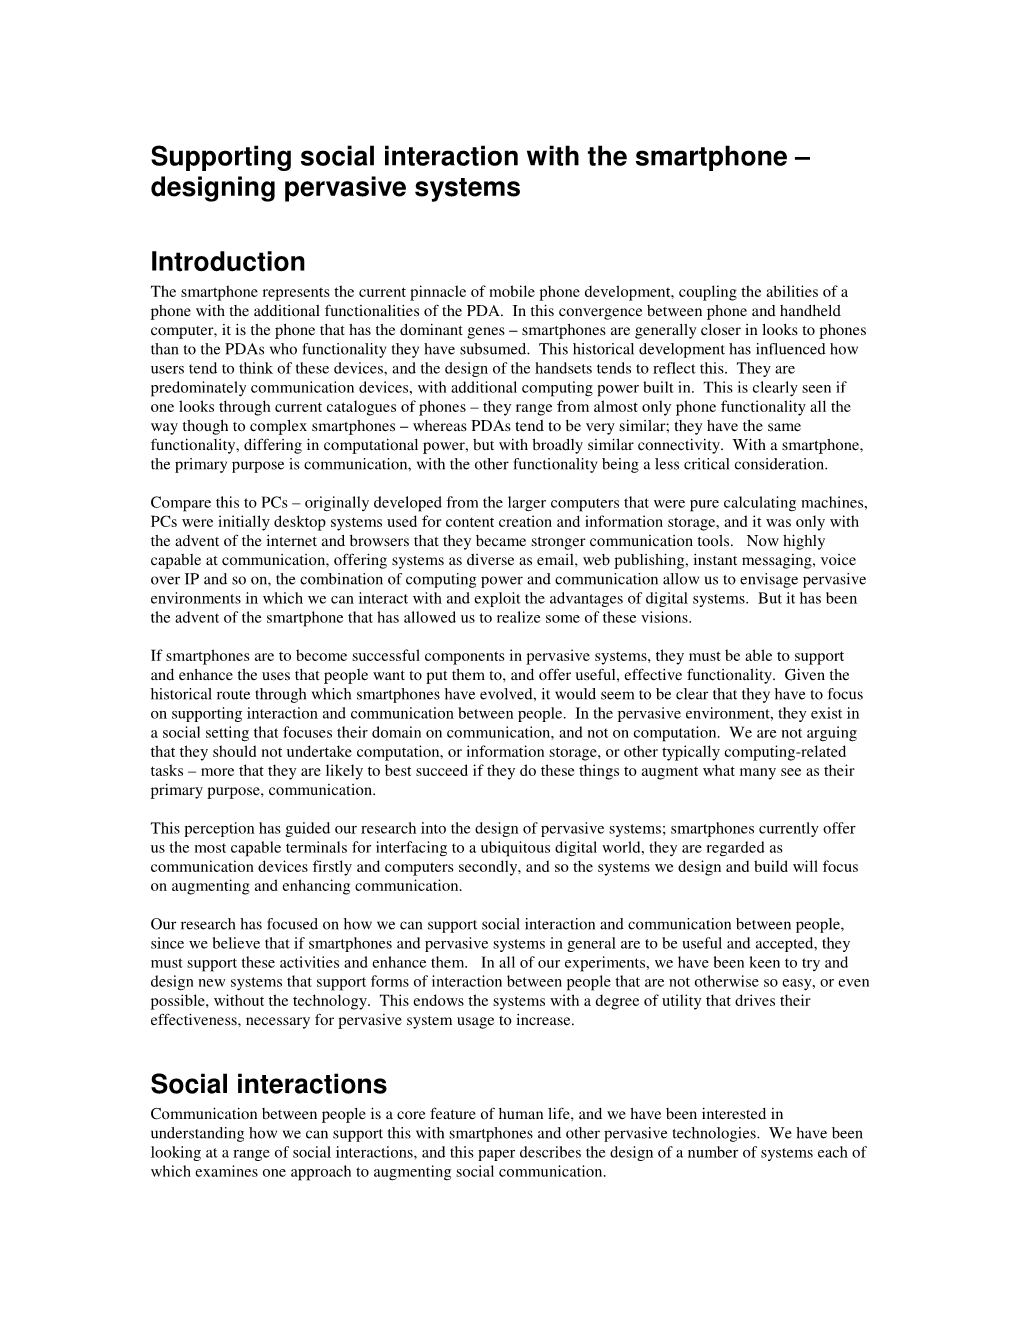 Supporting Social Interaction with the Smartphone – Designing Pervasive Systems